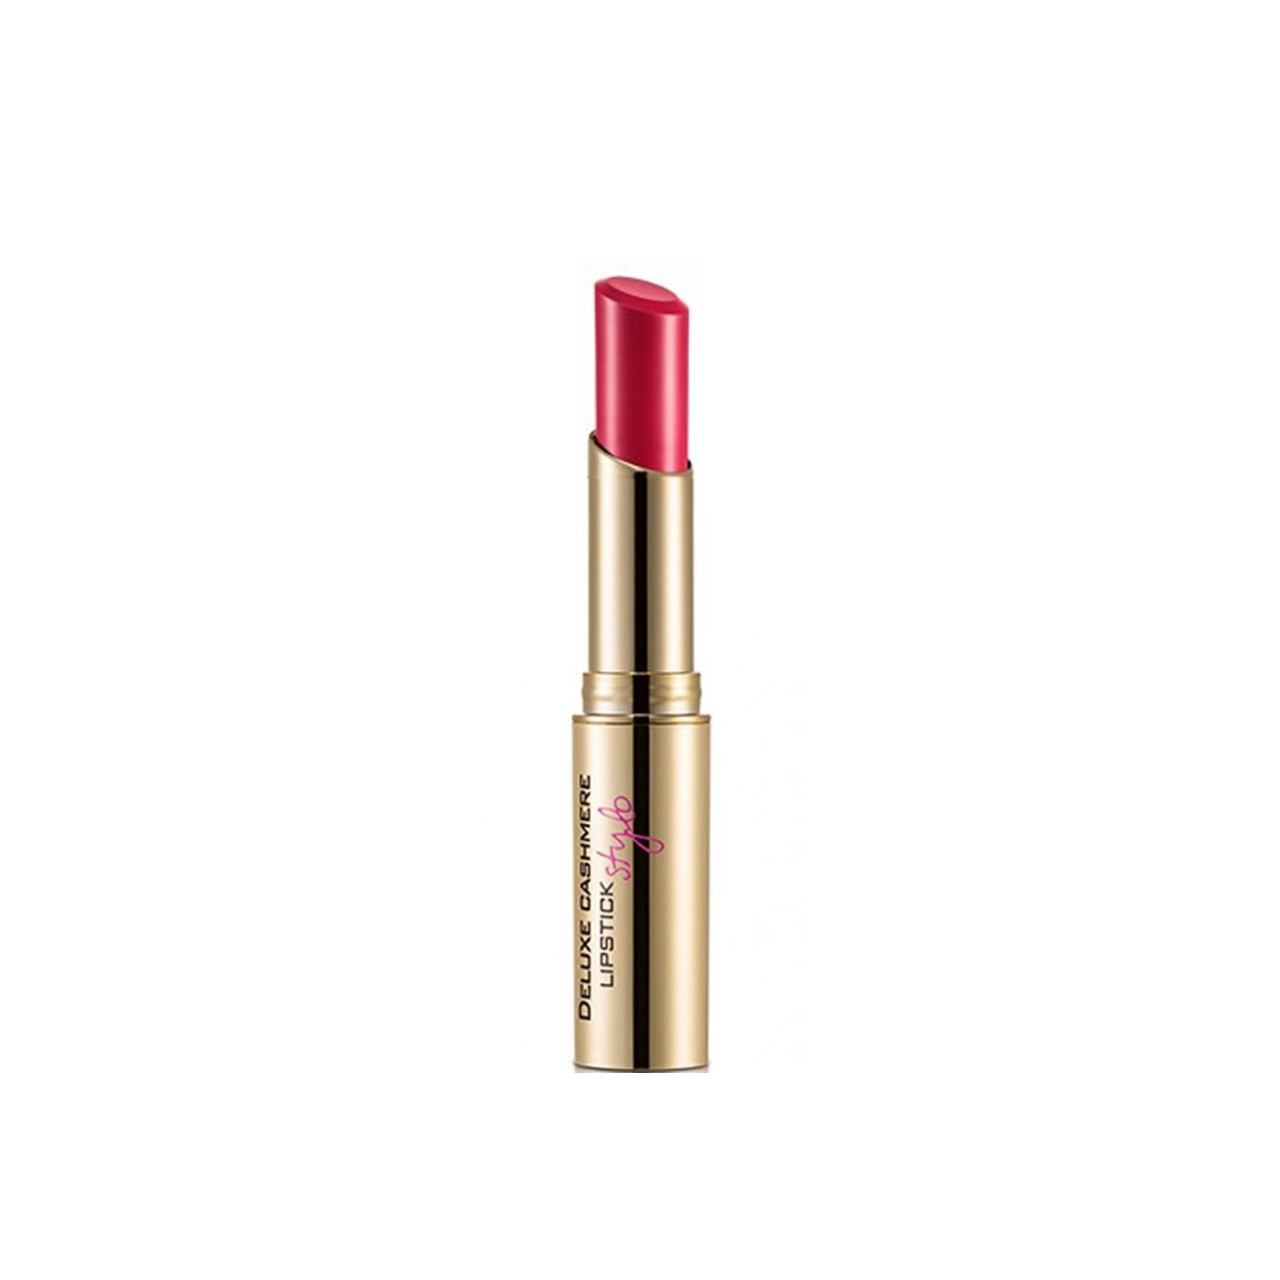 Flormar Deluxe Cashmere Lipstick Stylo DC24 Red Boston 3g